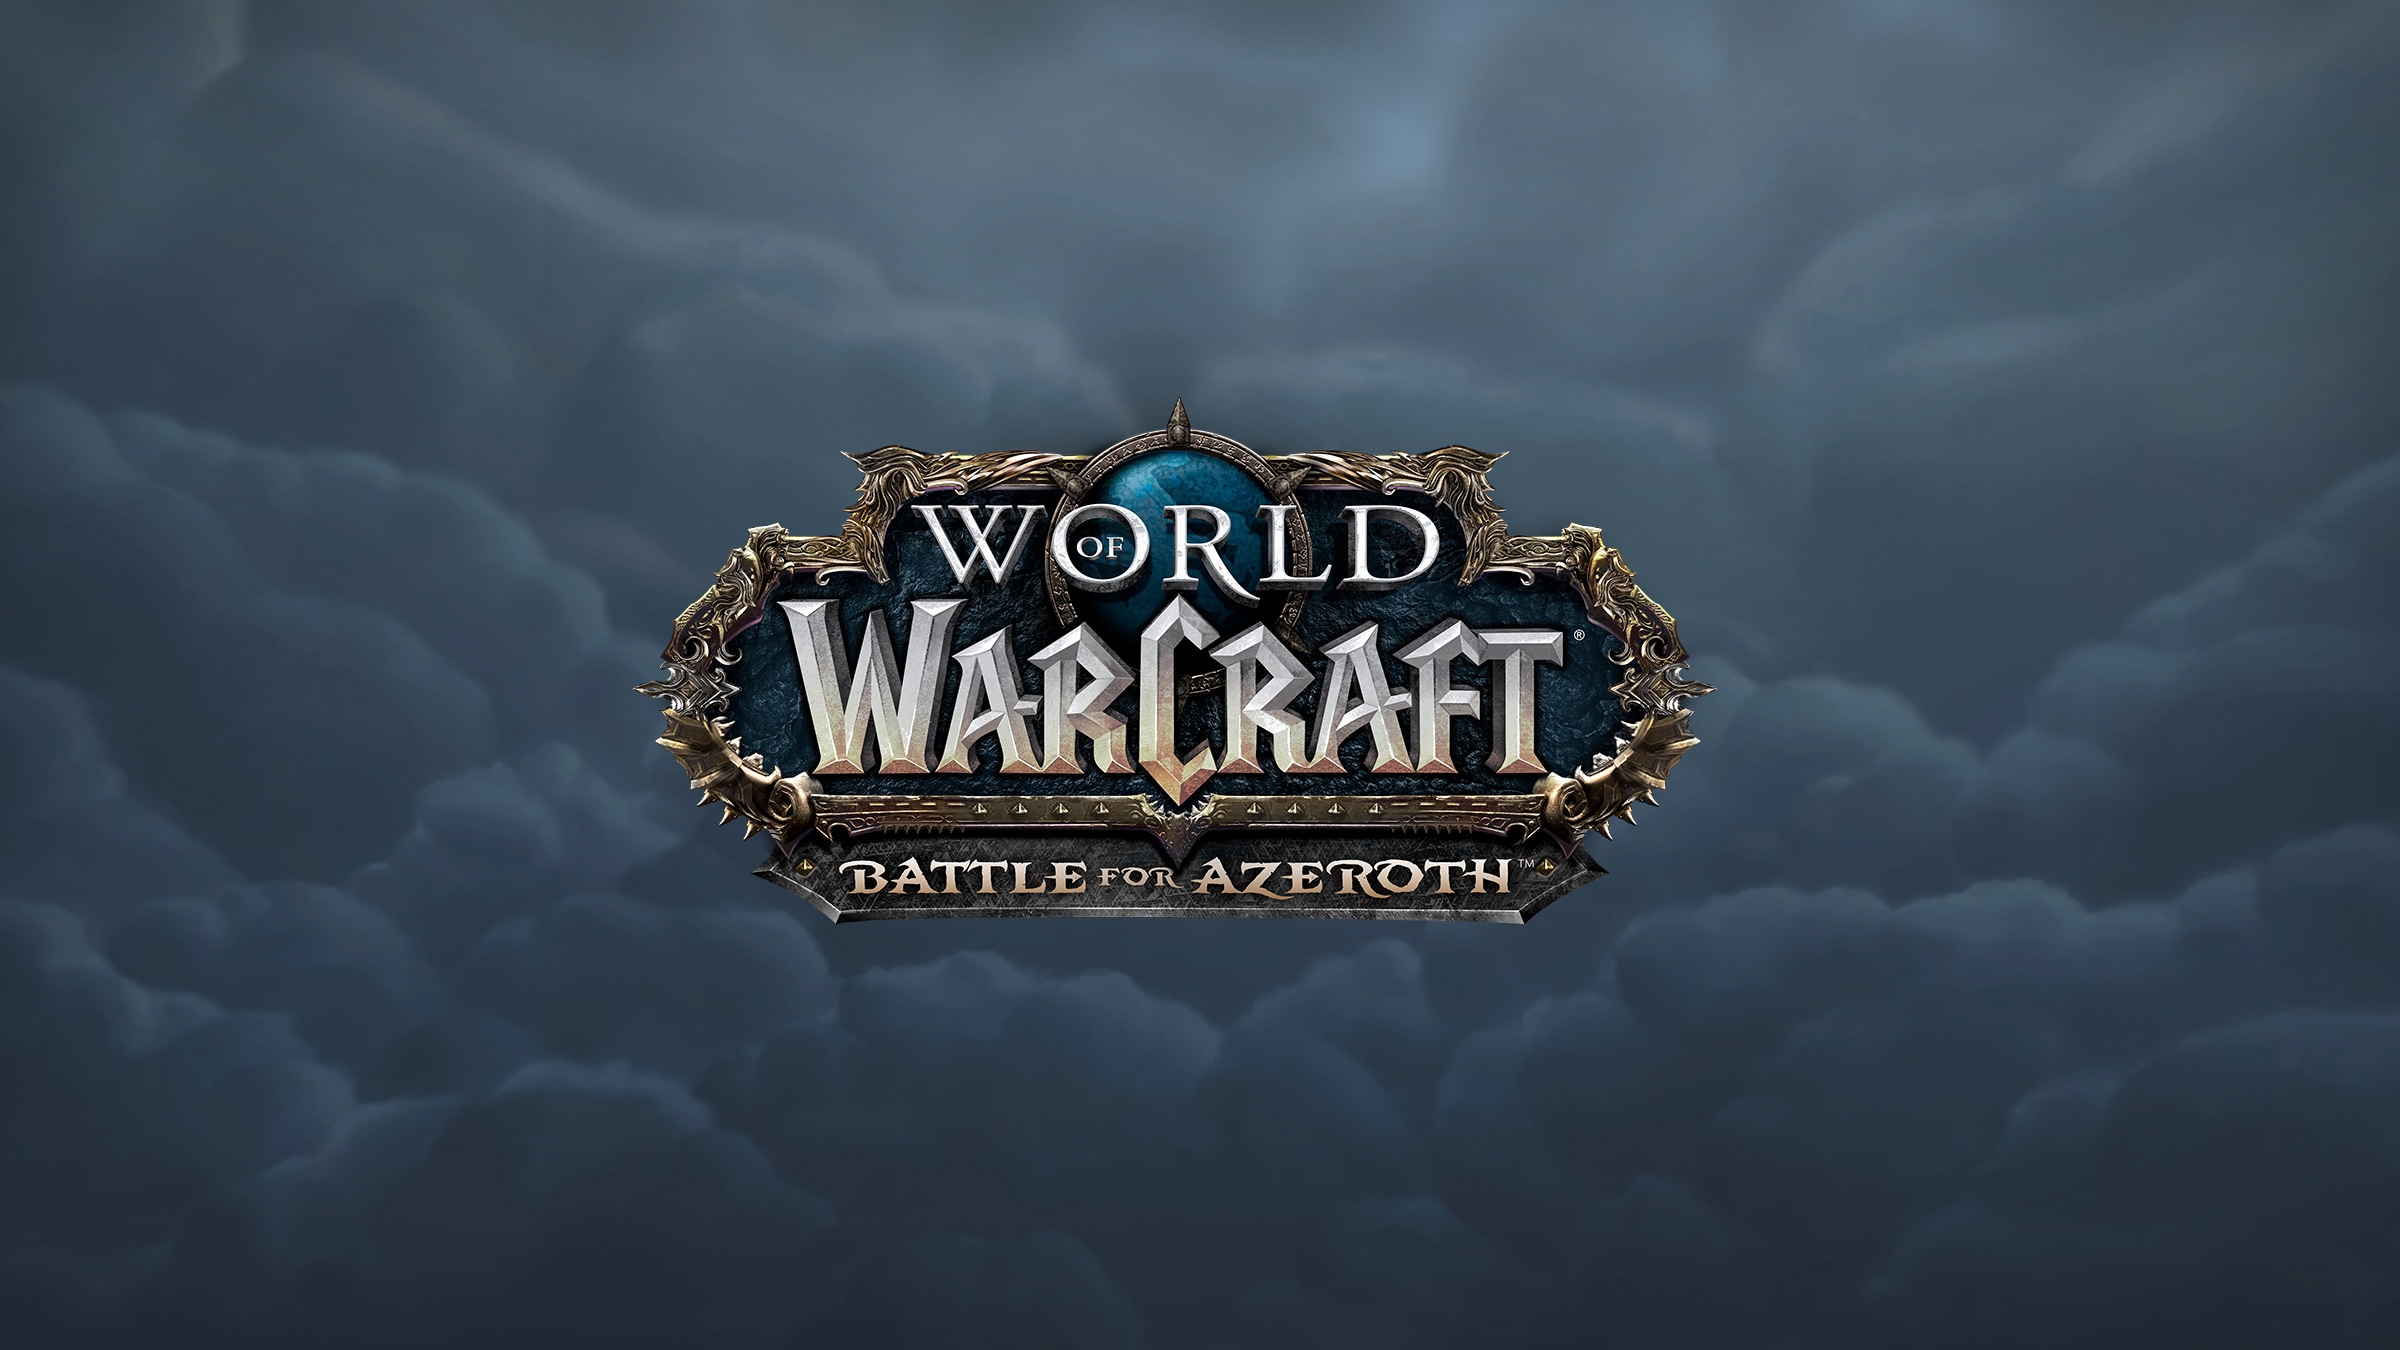 Battle for Azeroth™: One Launch to Rule Them All